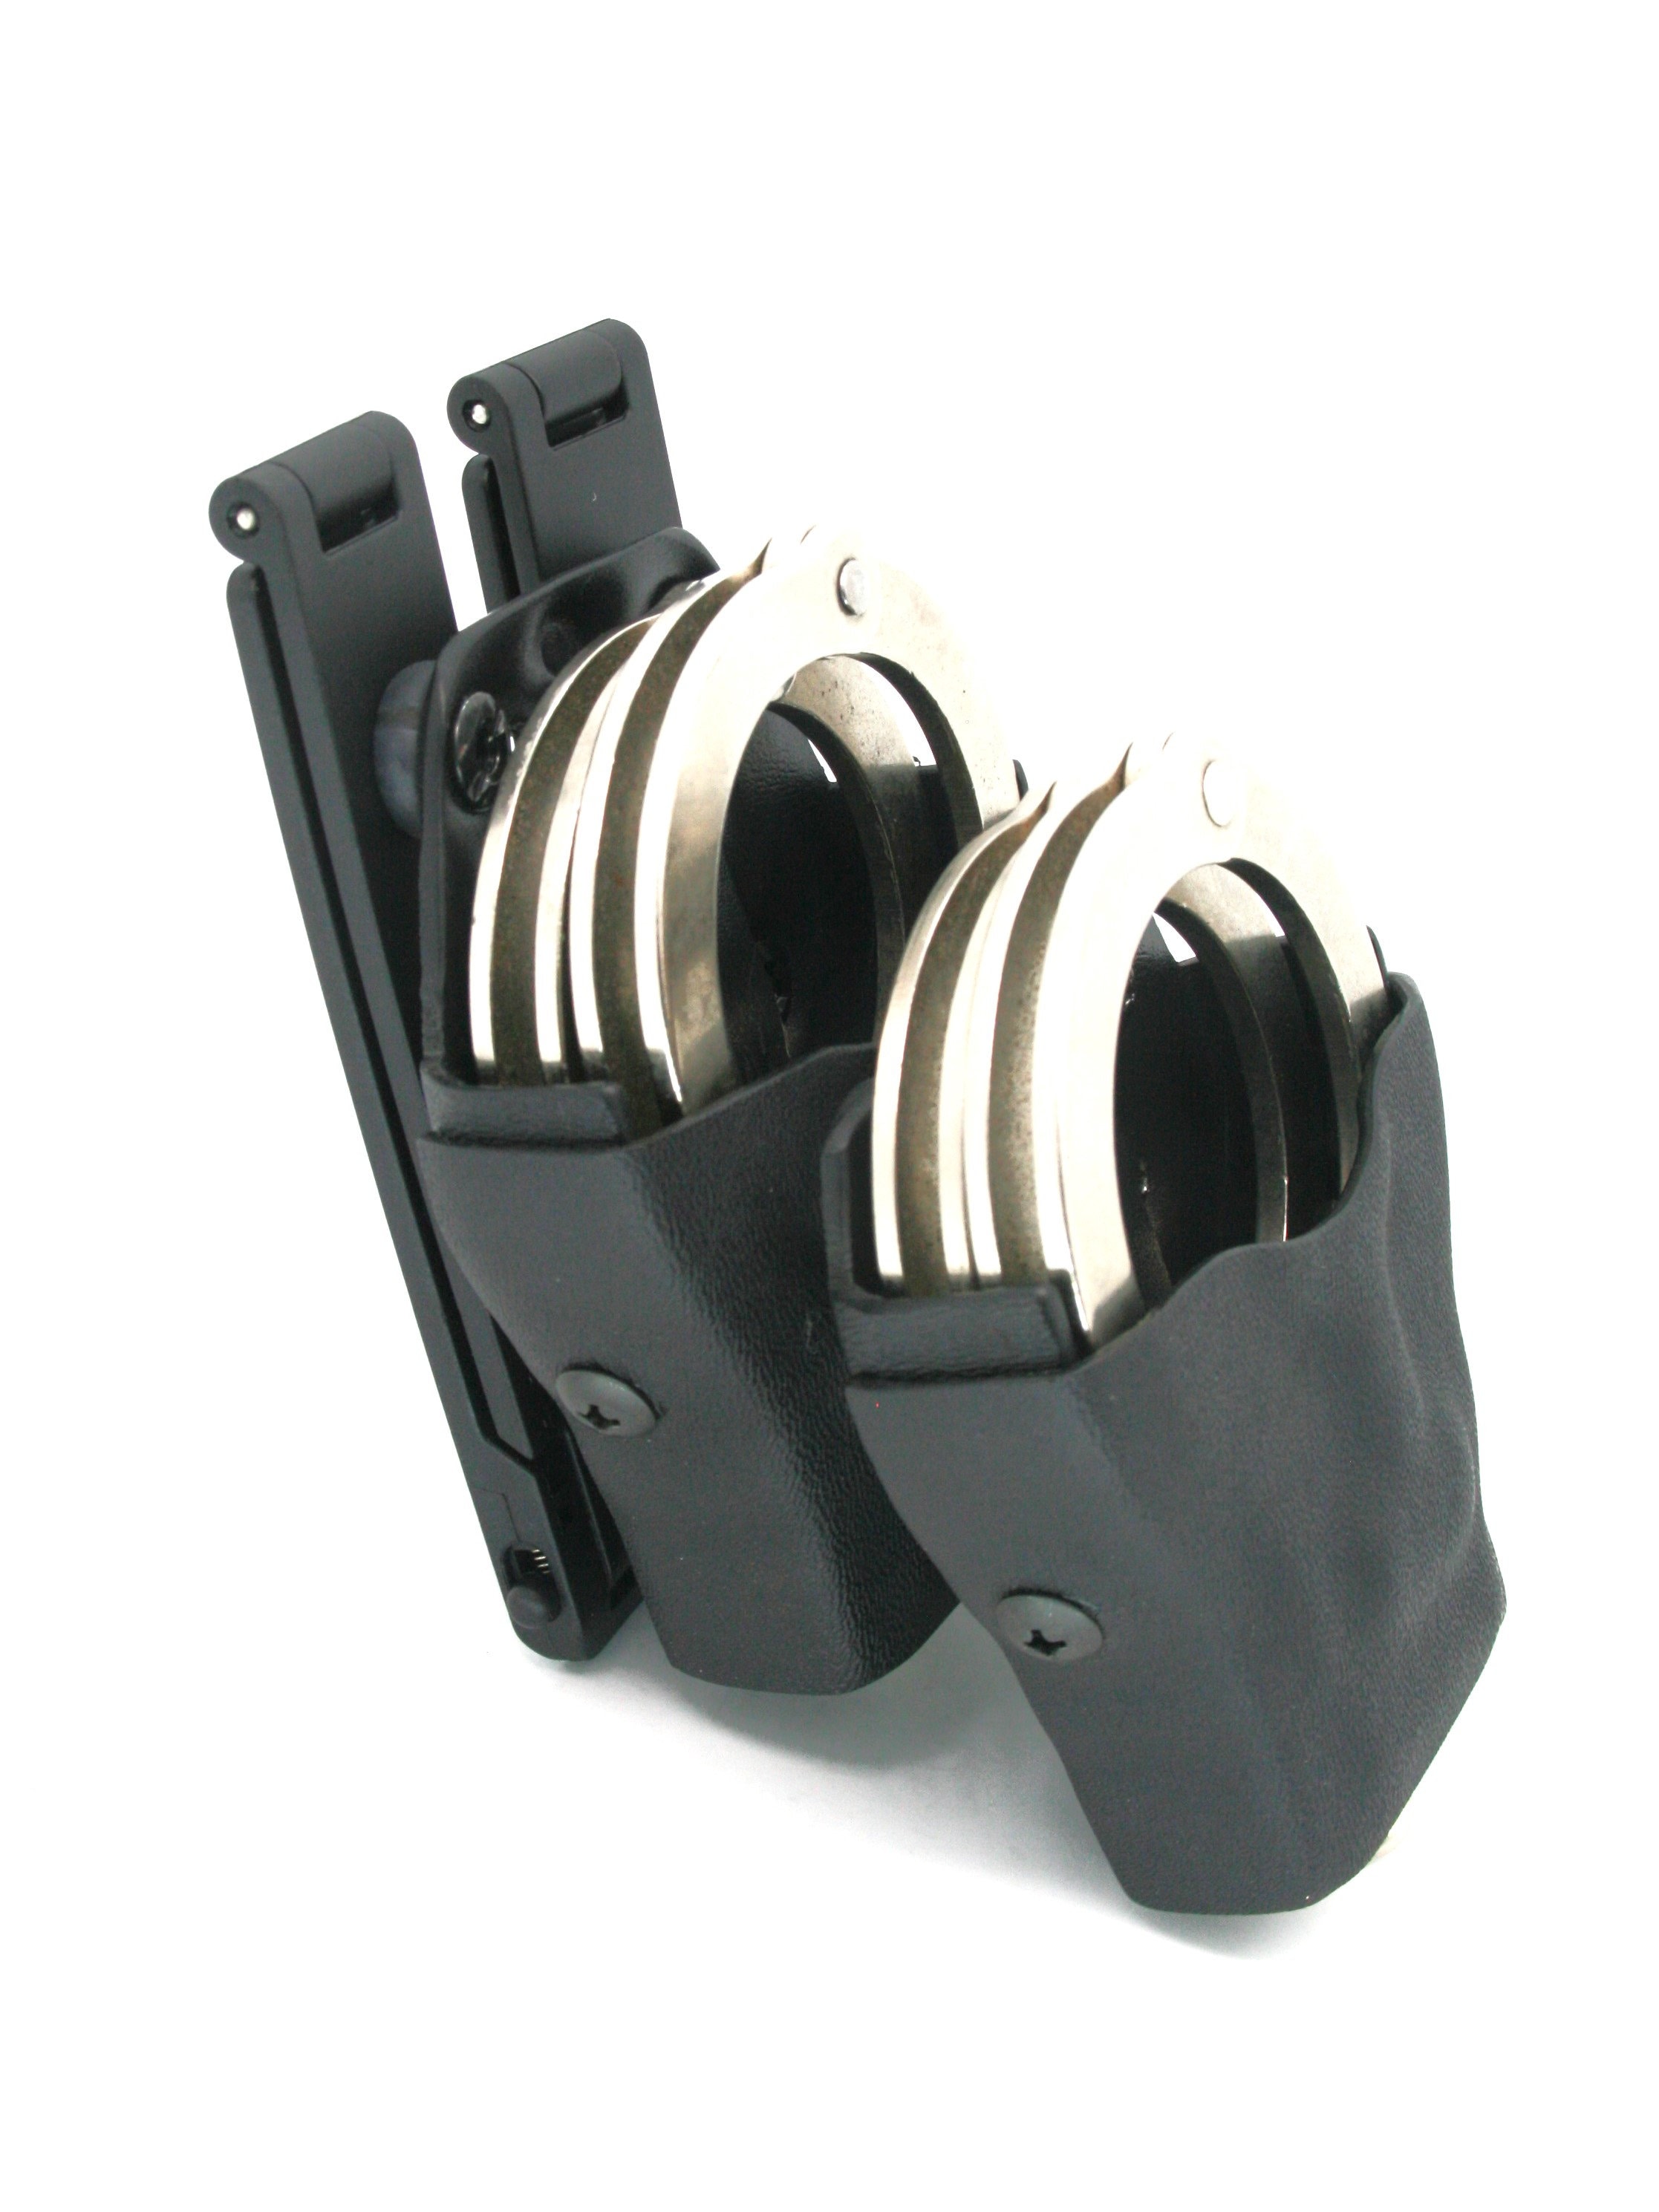 ES® System, Whisper Cuff Case-Handcuff holster with sound reduction